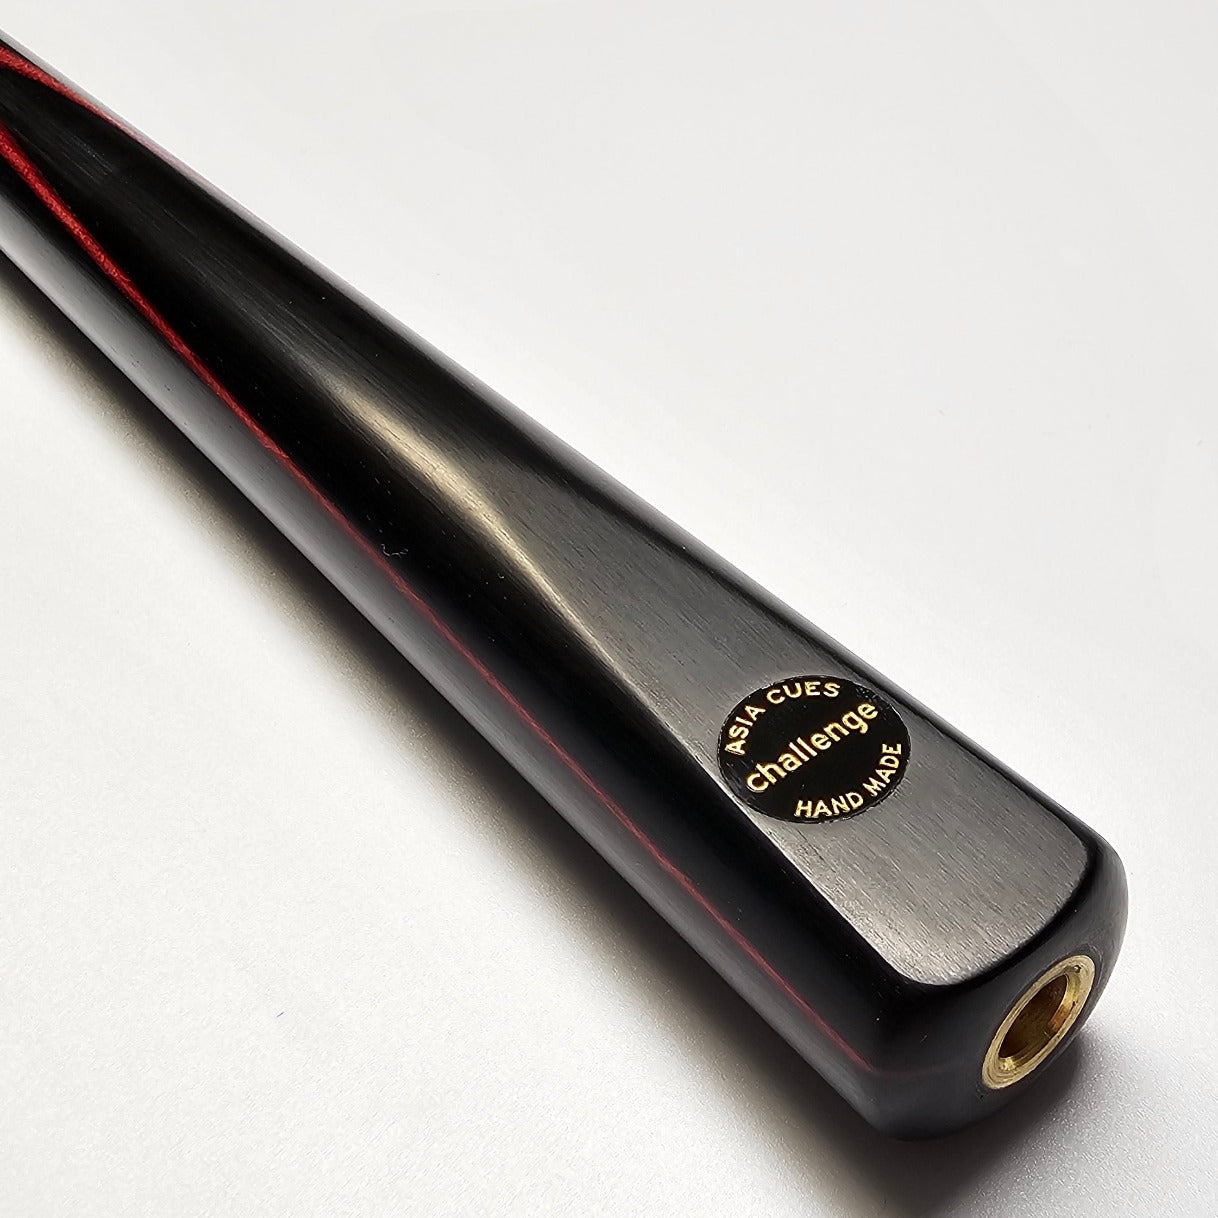 Asia Cues Challenge Range One Piece Cue Ash Shaft Ebony Butt with Red Veneer. Badge View